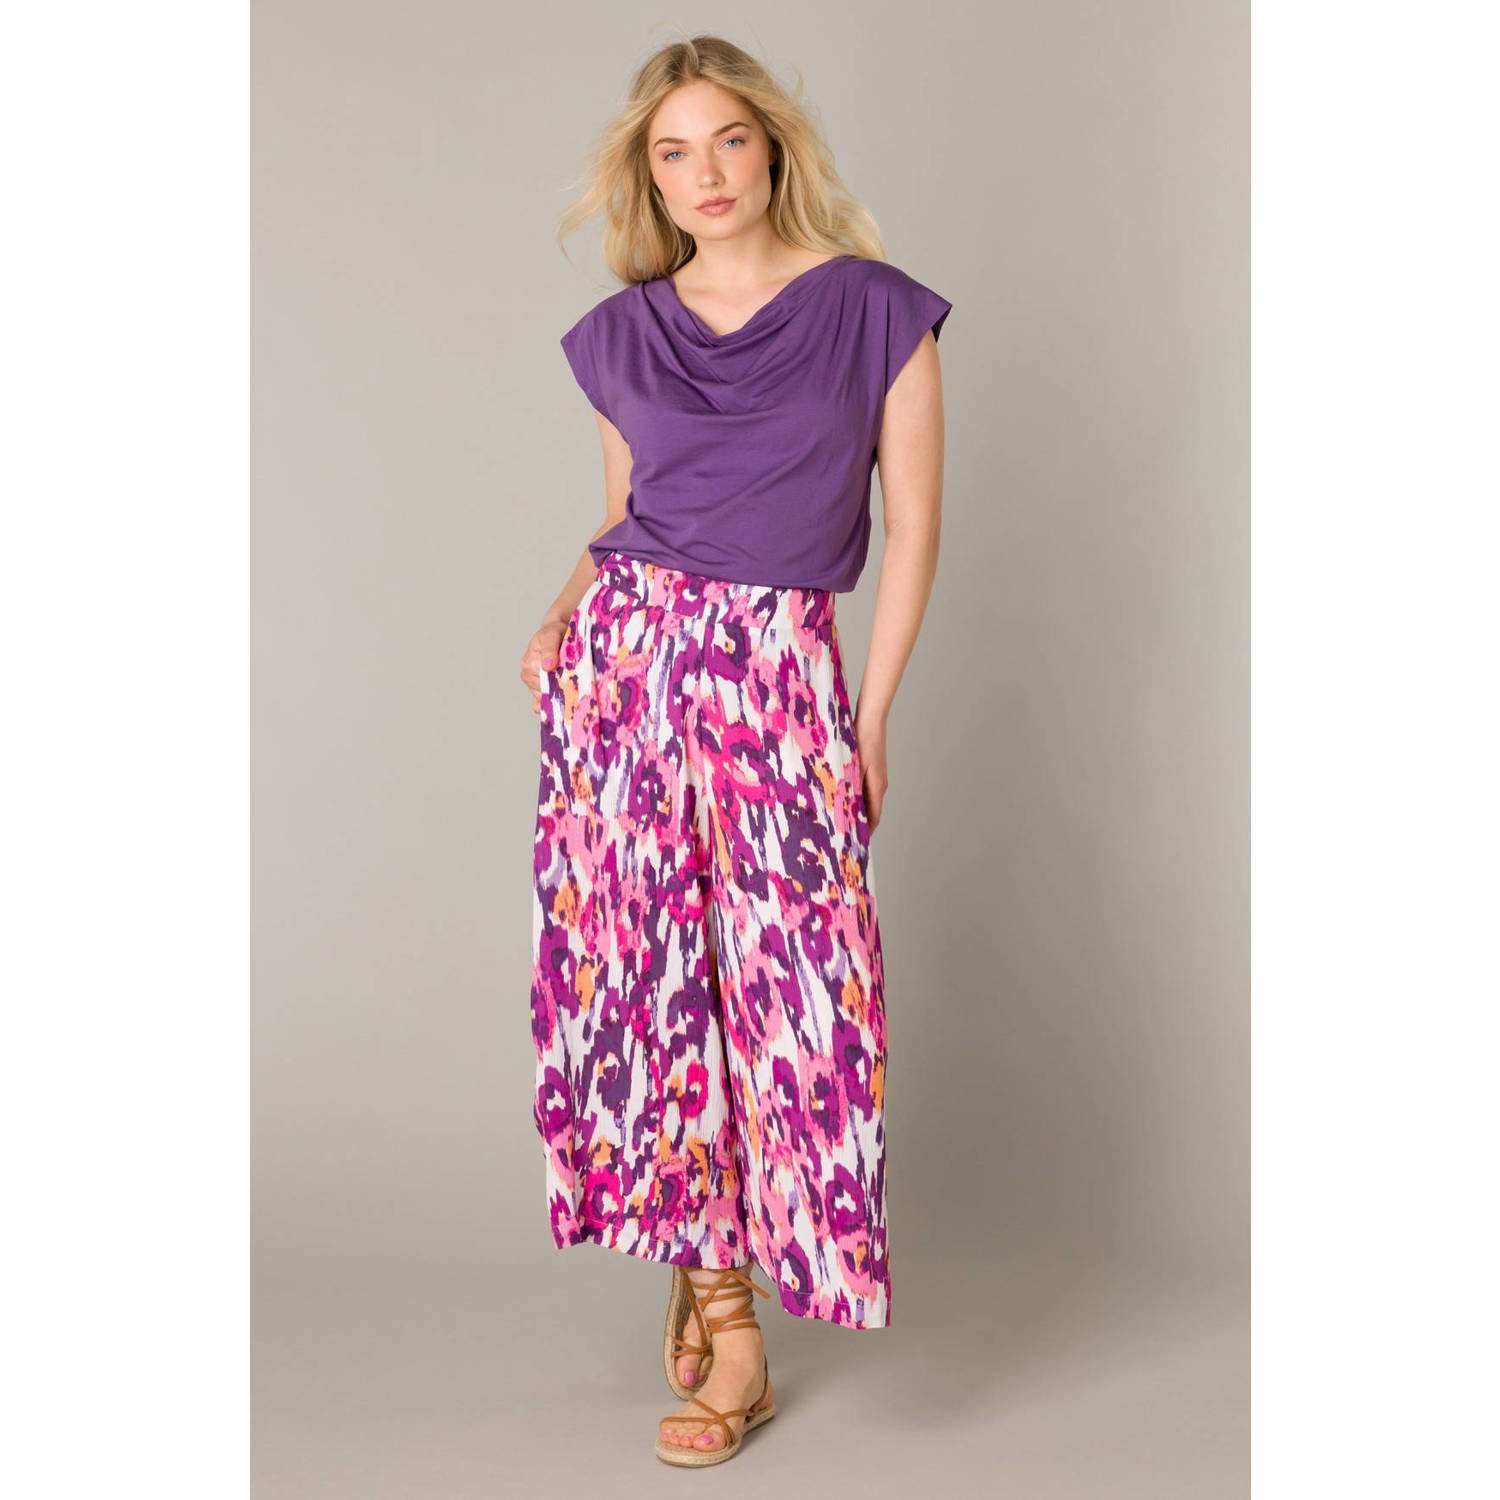 Yest high waist loose fit broek met all over print roze fuchsia wit